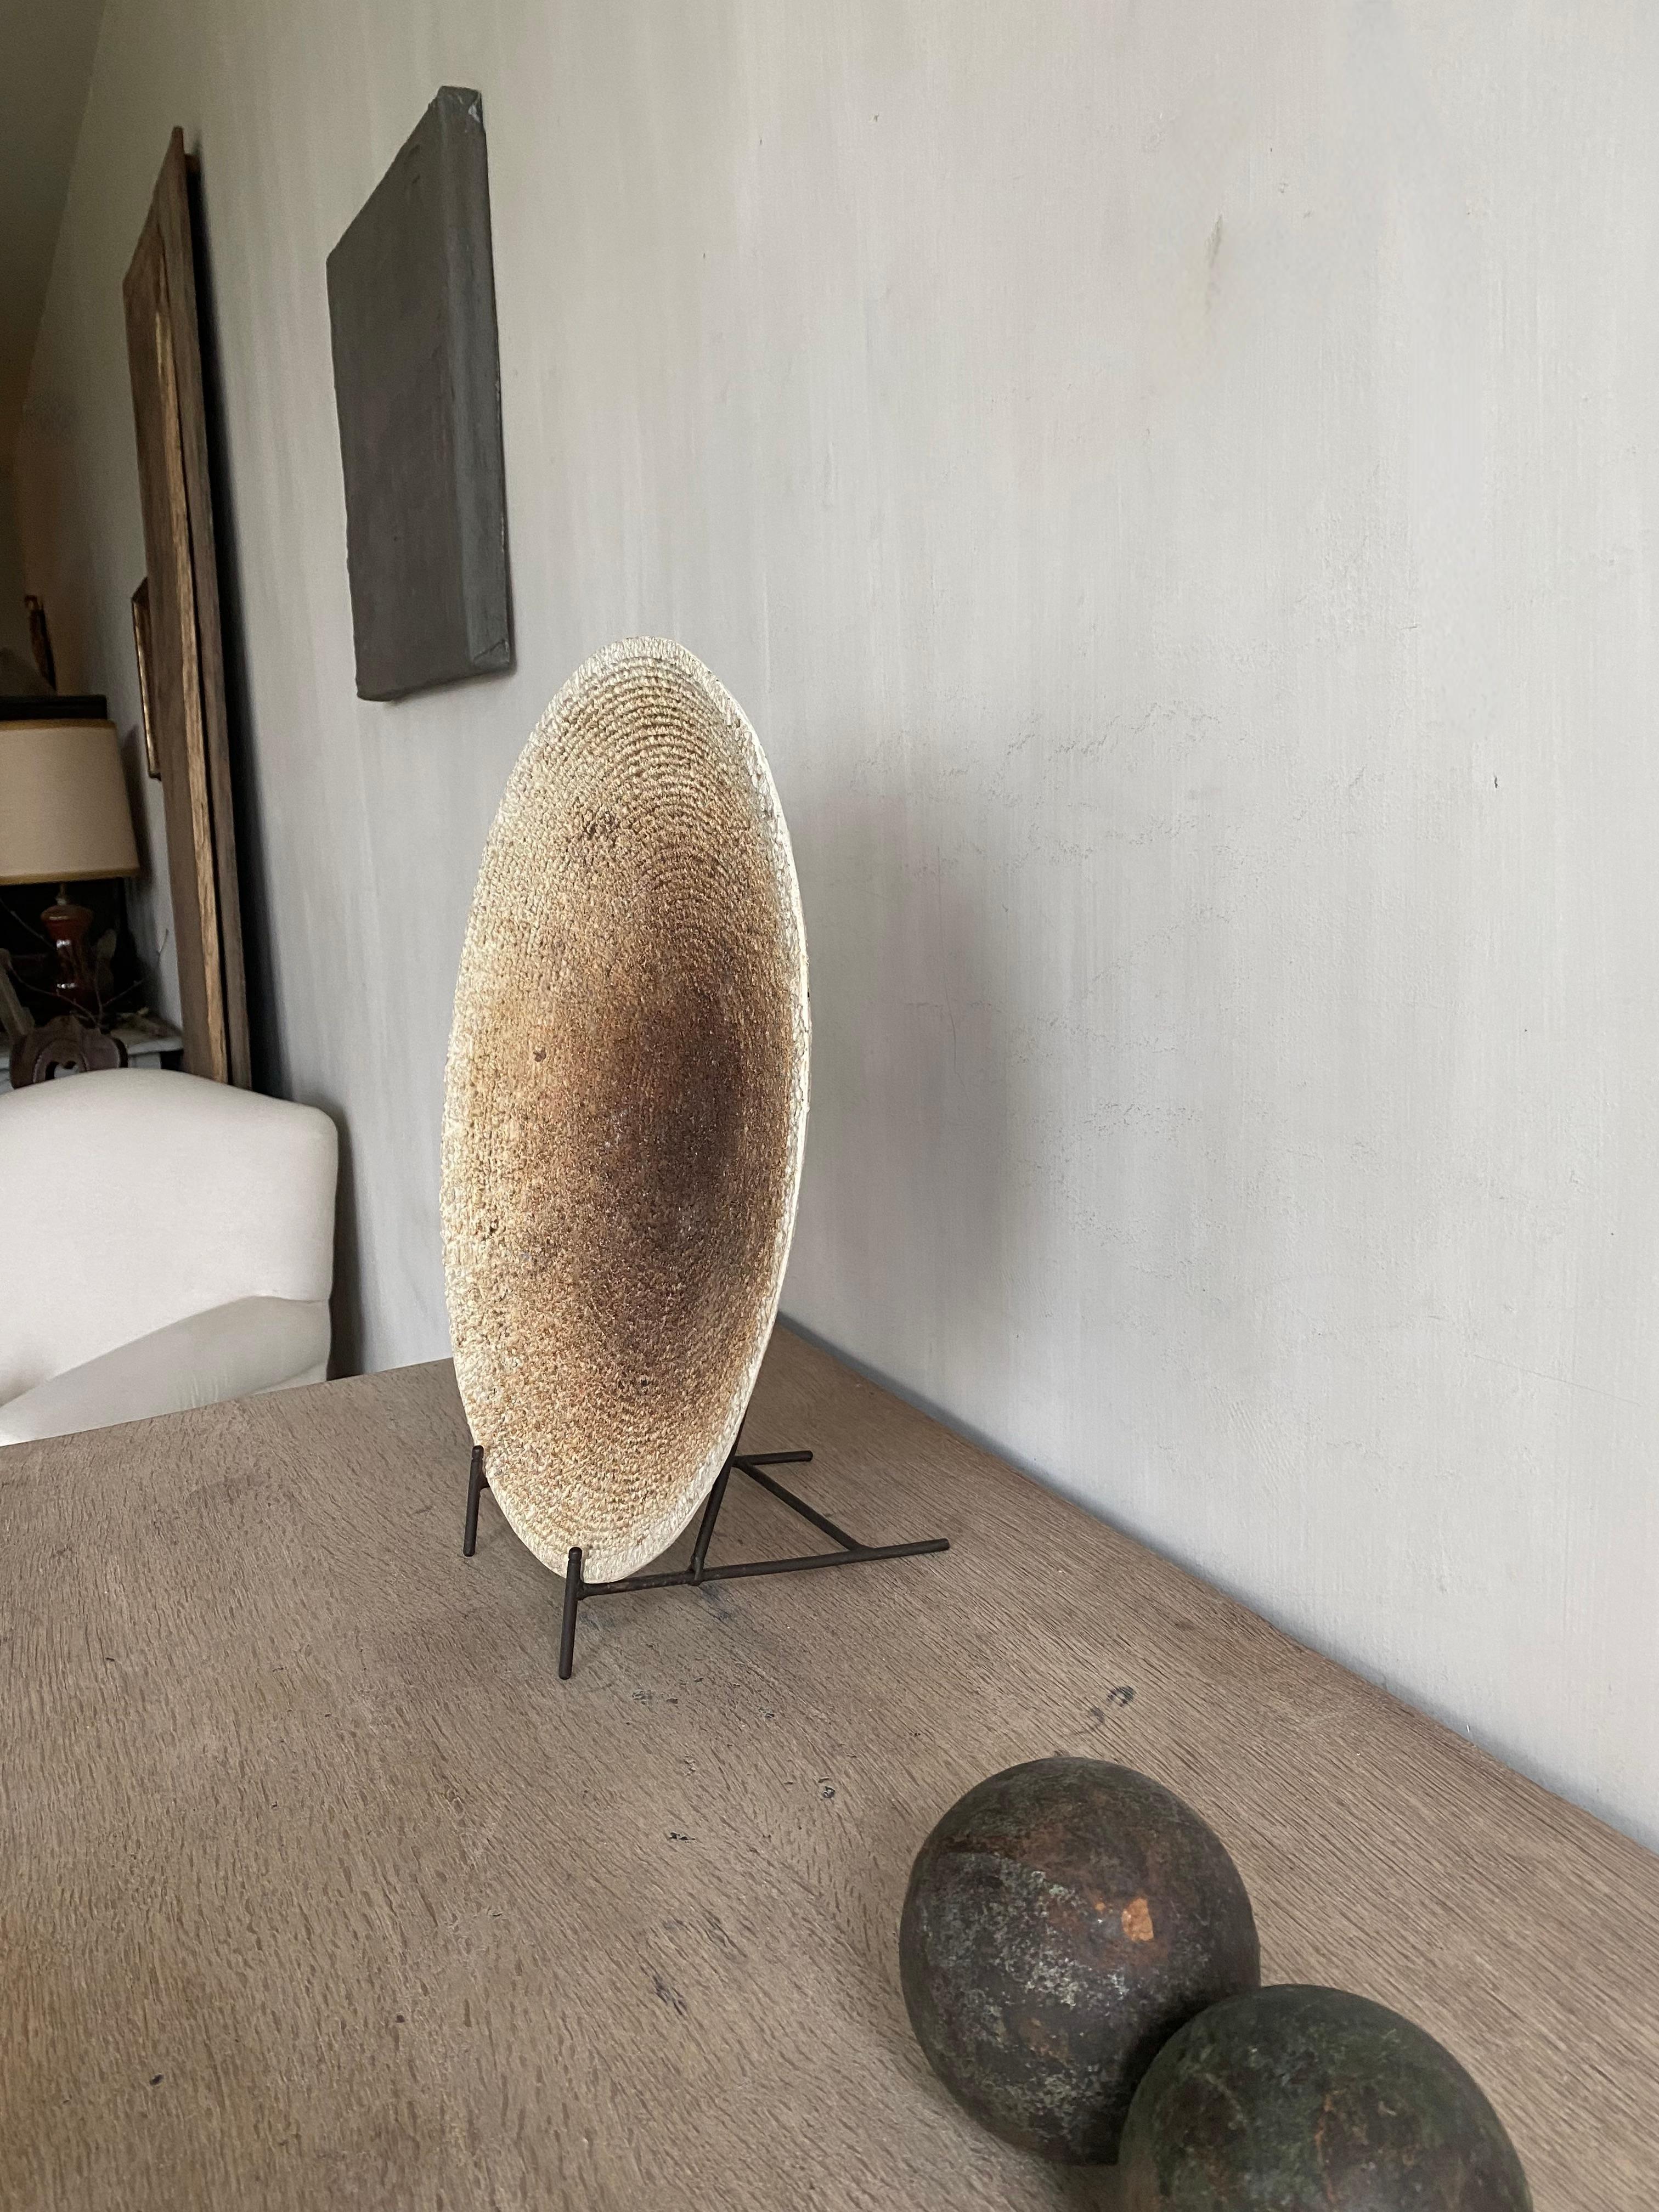 This impressive Italian vintage bowl is a ceramic work of craftsmanship.
The piece from 1970, is without damage and has a unique degrading patina and fantastic detail work.
The whole comes with a tripod and is a total of 48 cm high and 21 cm